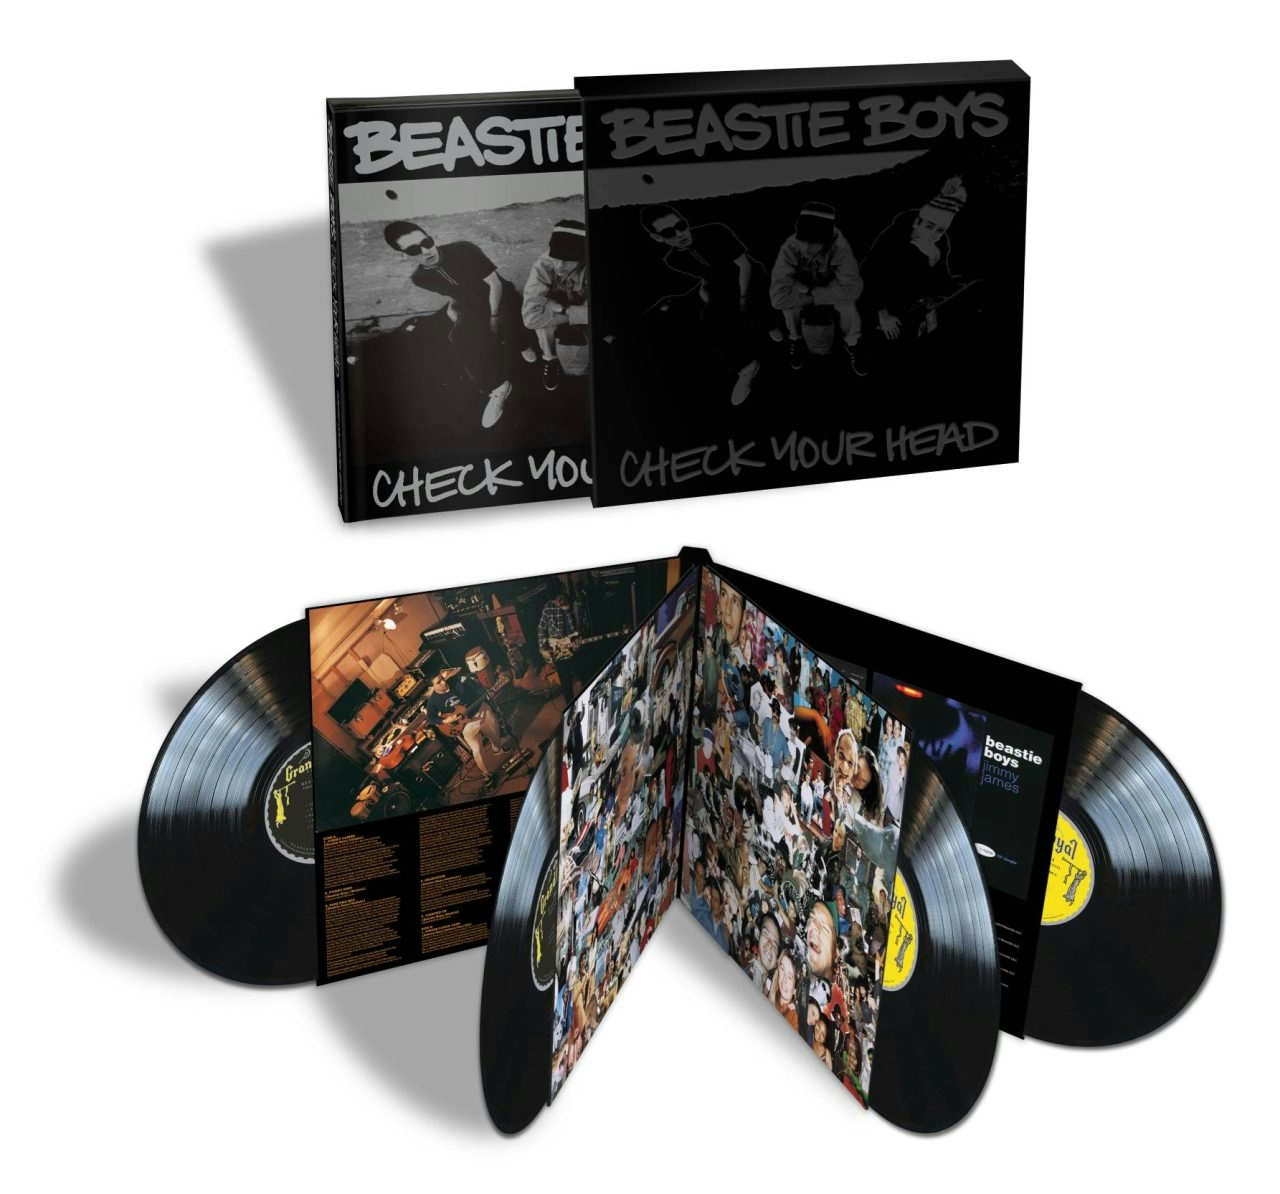 Album artwork for Album artwork for Check Your Head - 30th Anniversary by Beastie Boys by Check Your Head - 30th Anniversary - Beastie Boys